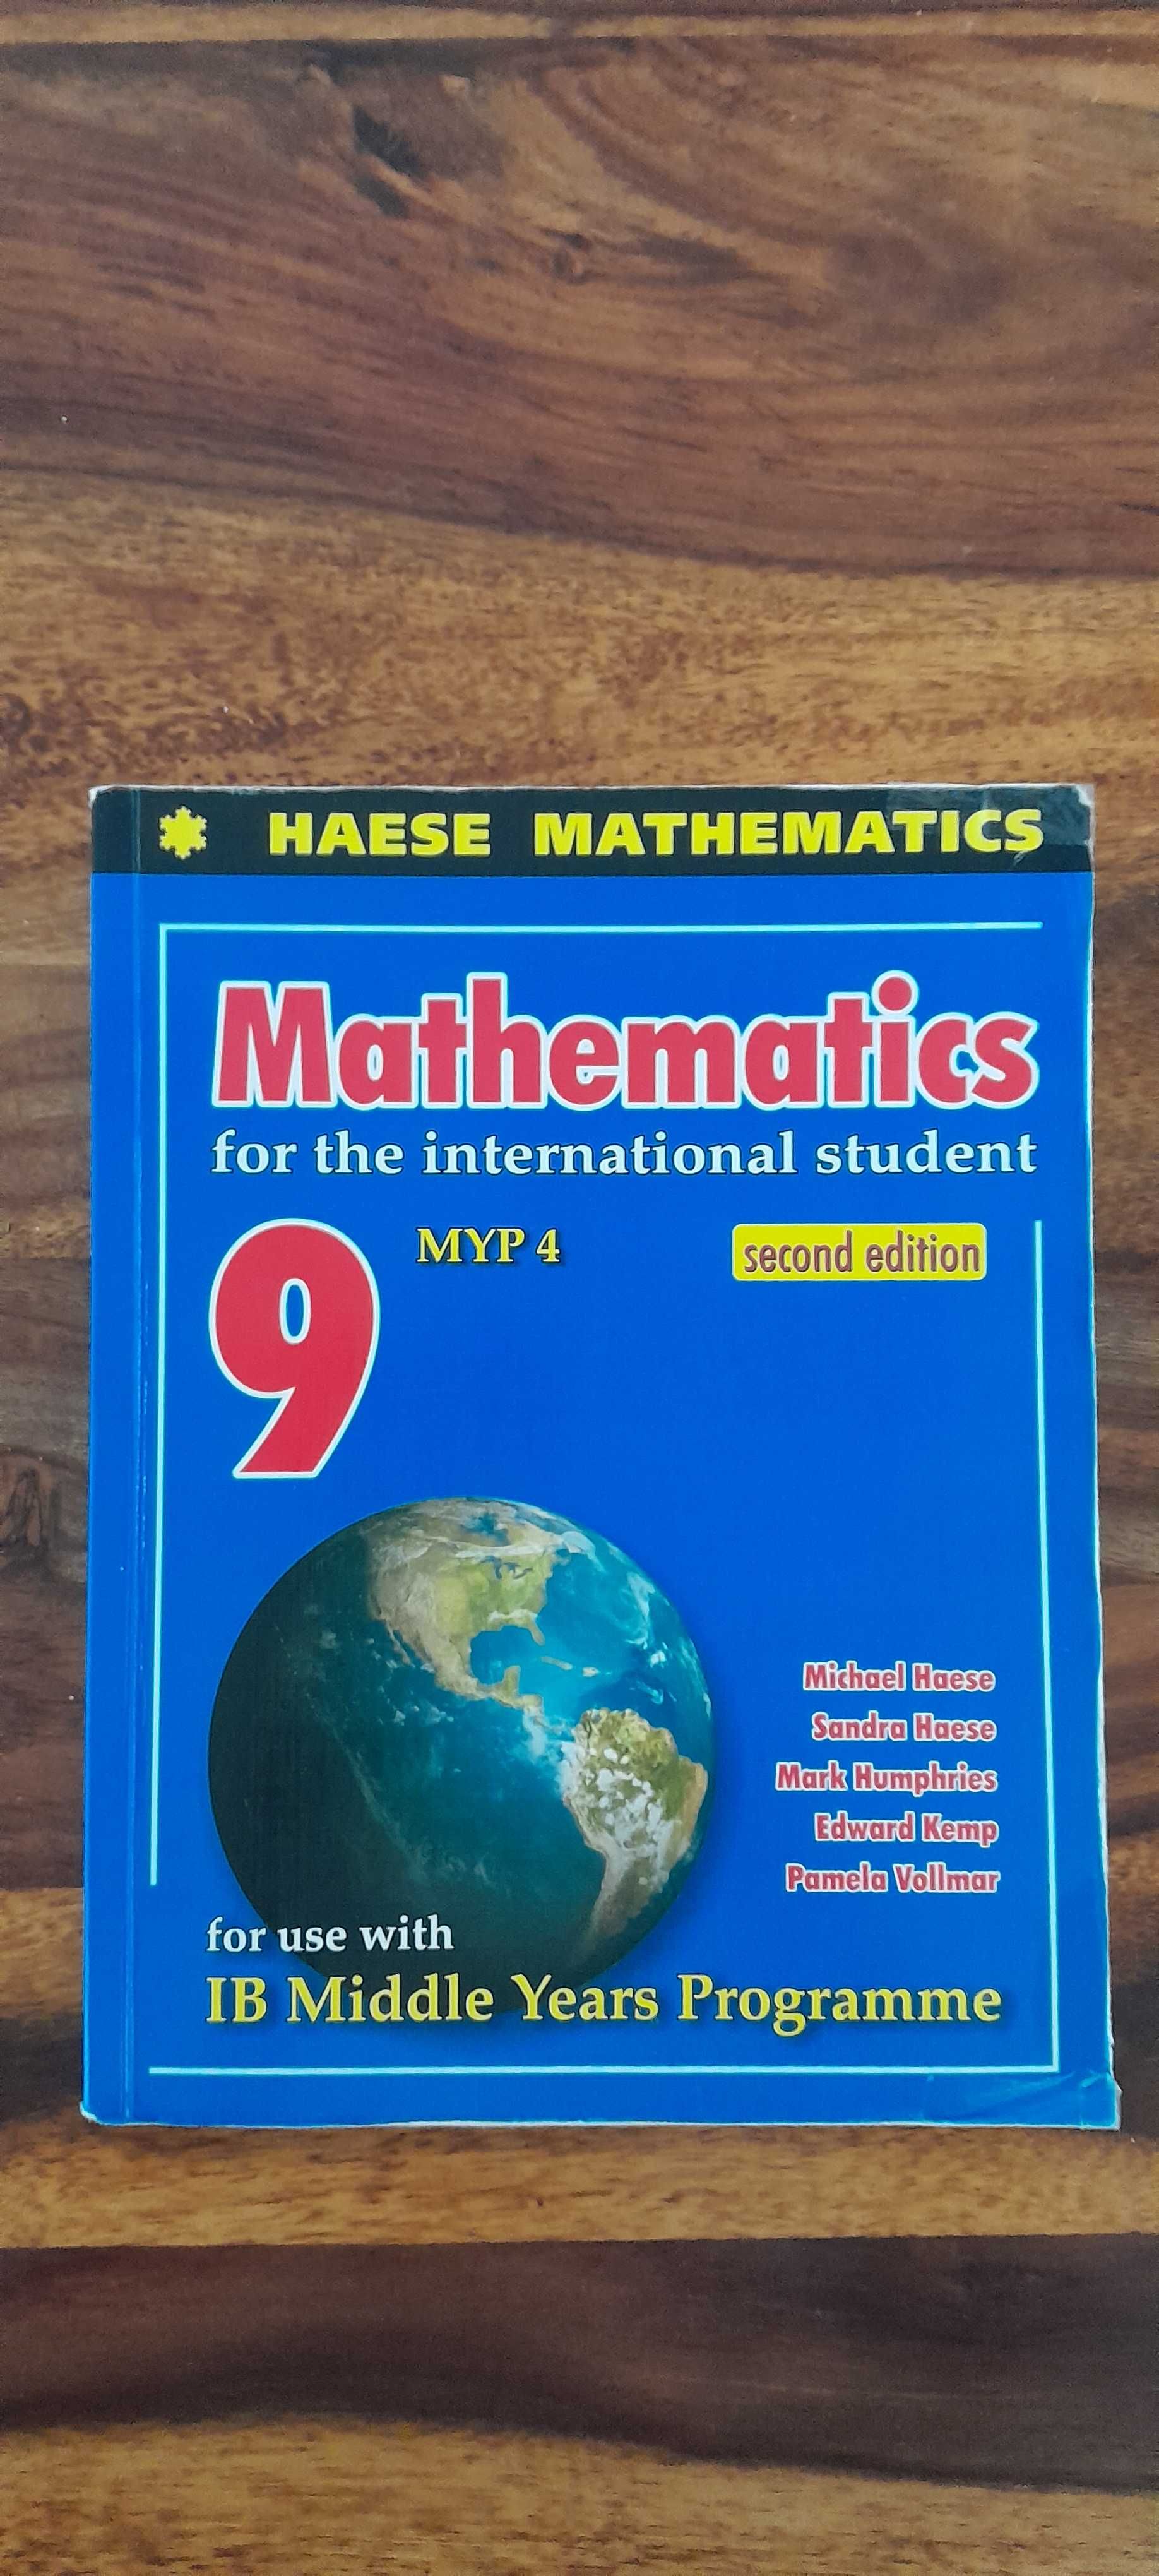 Mathematics for the International Student 9 MYP 4 Second Edition